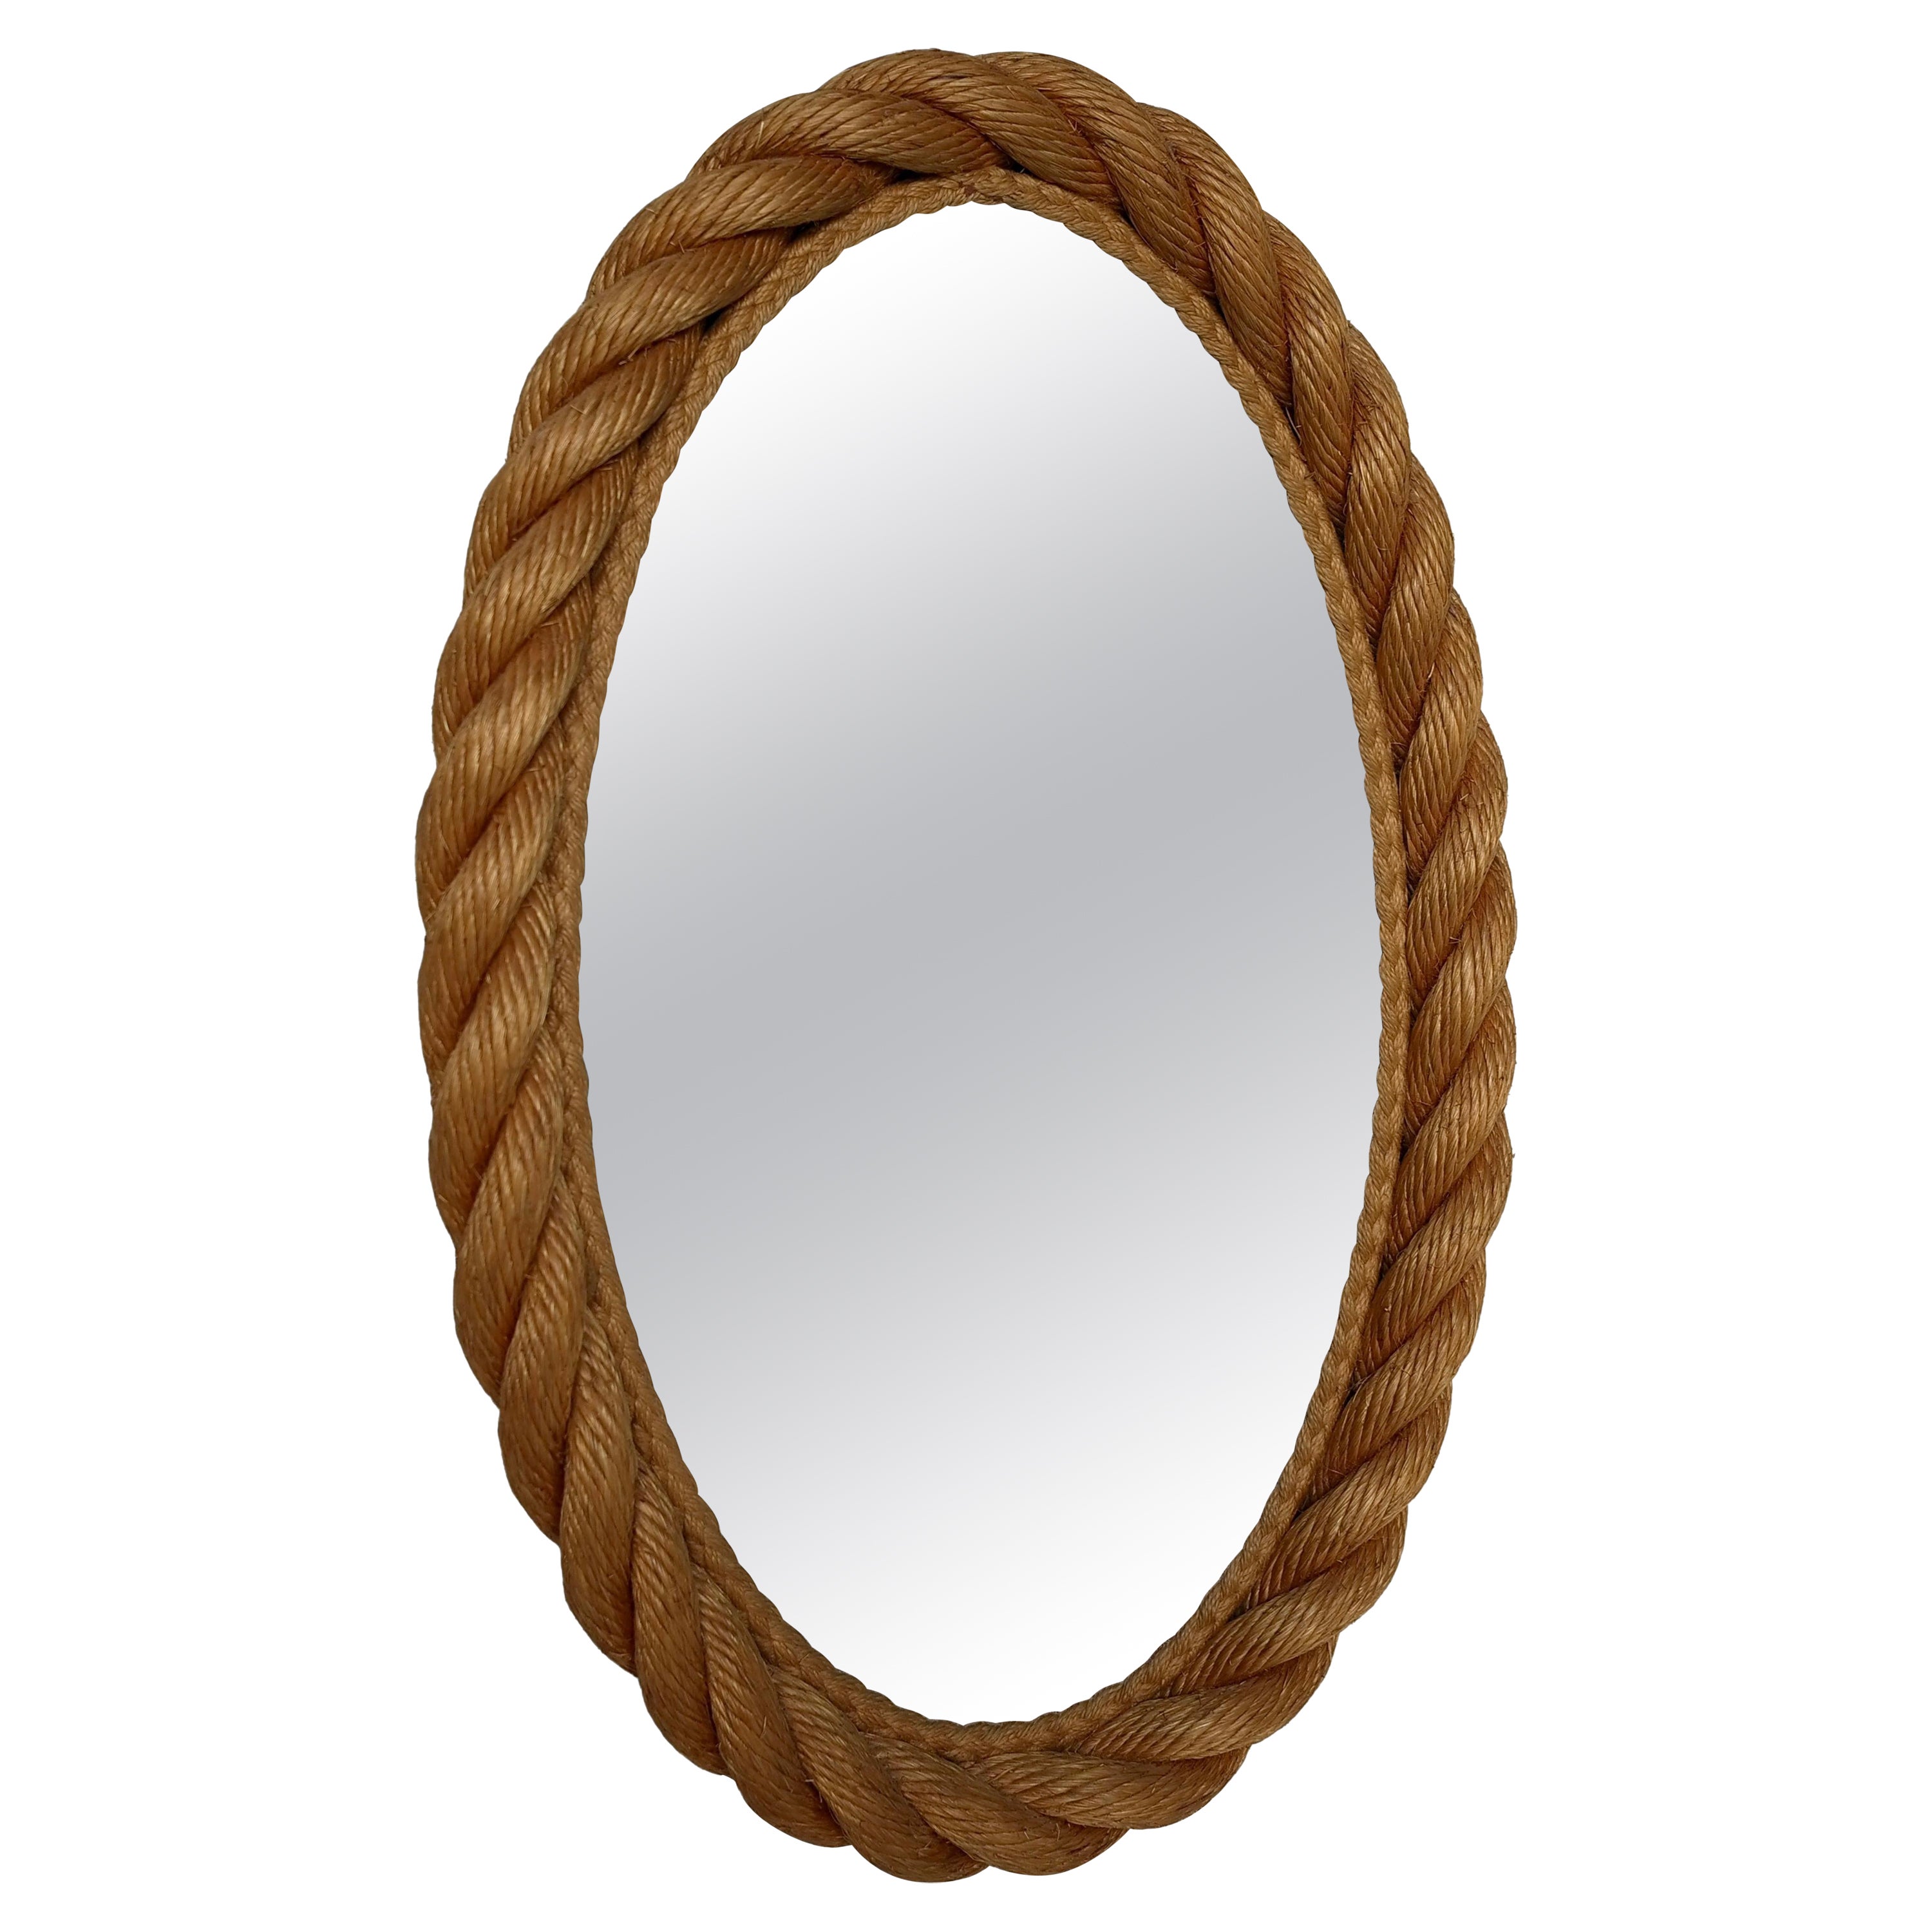 Oval Rope Mirror by Adrien Audoux and Frida Minet, France, 1950s